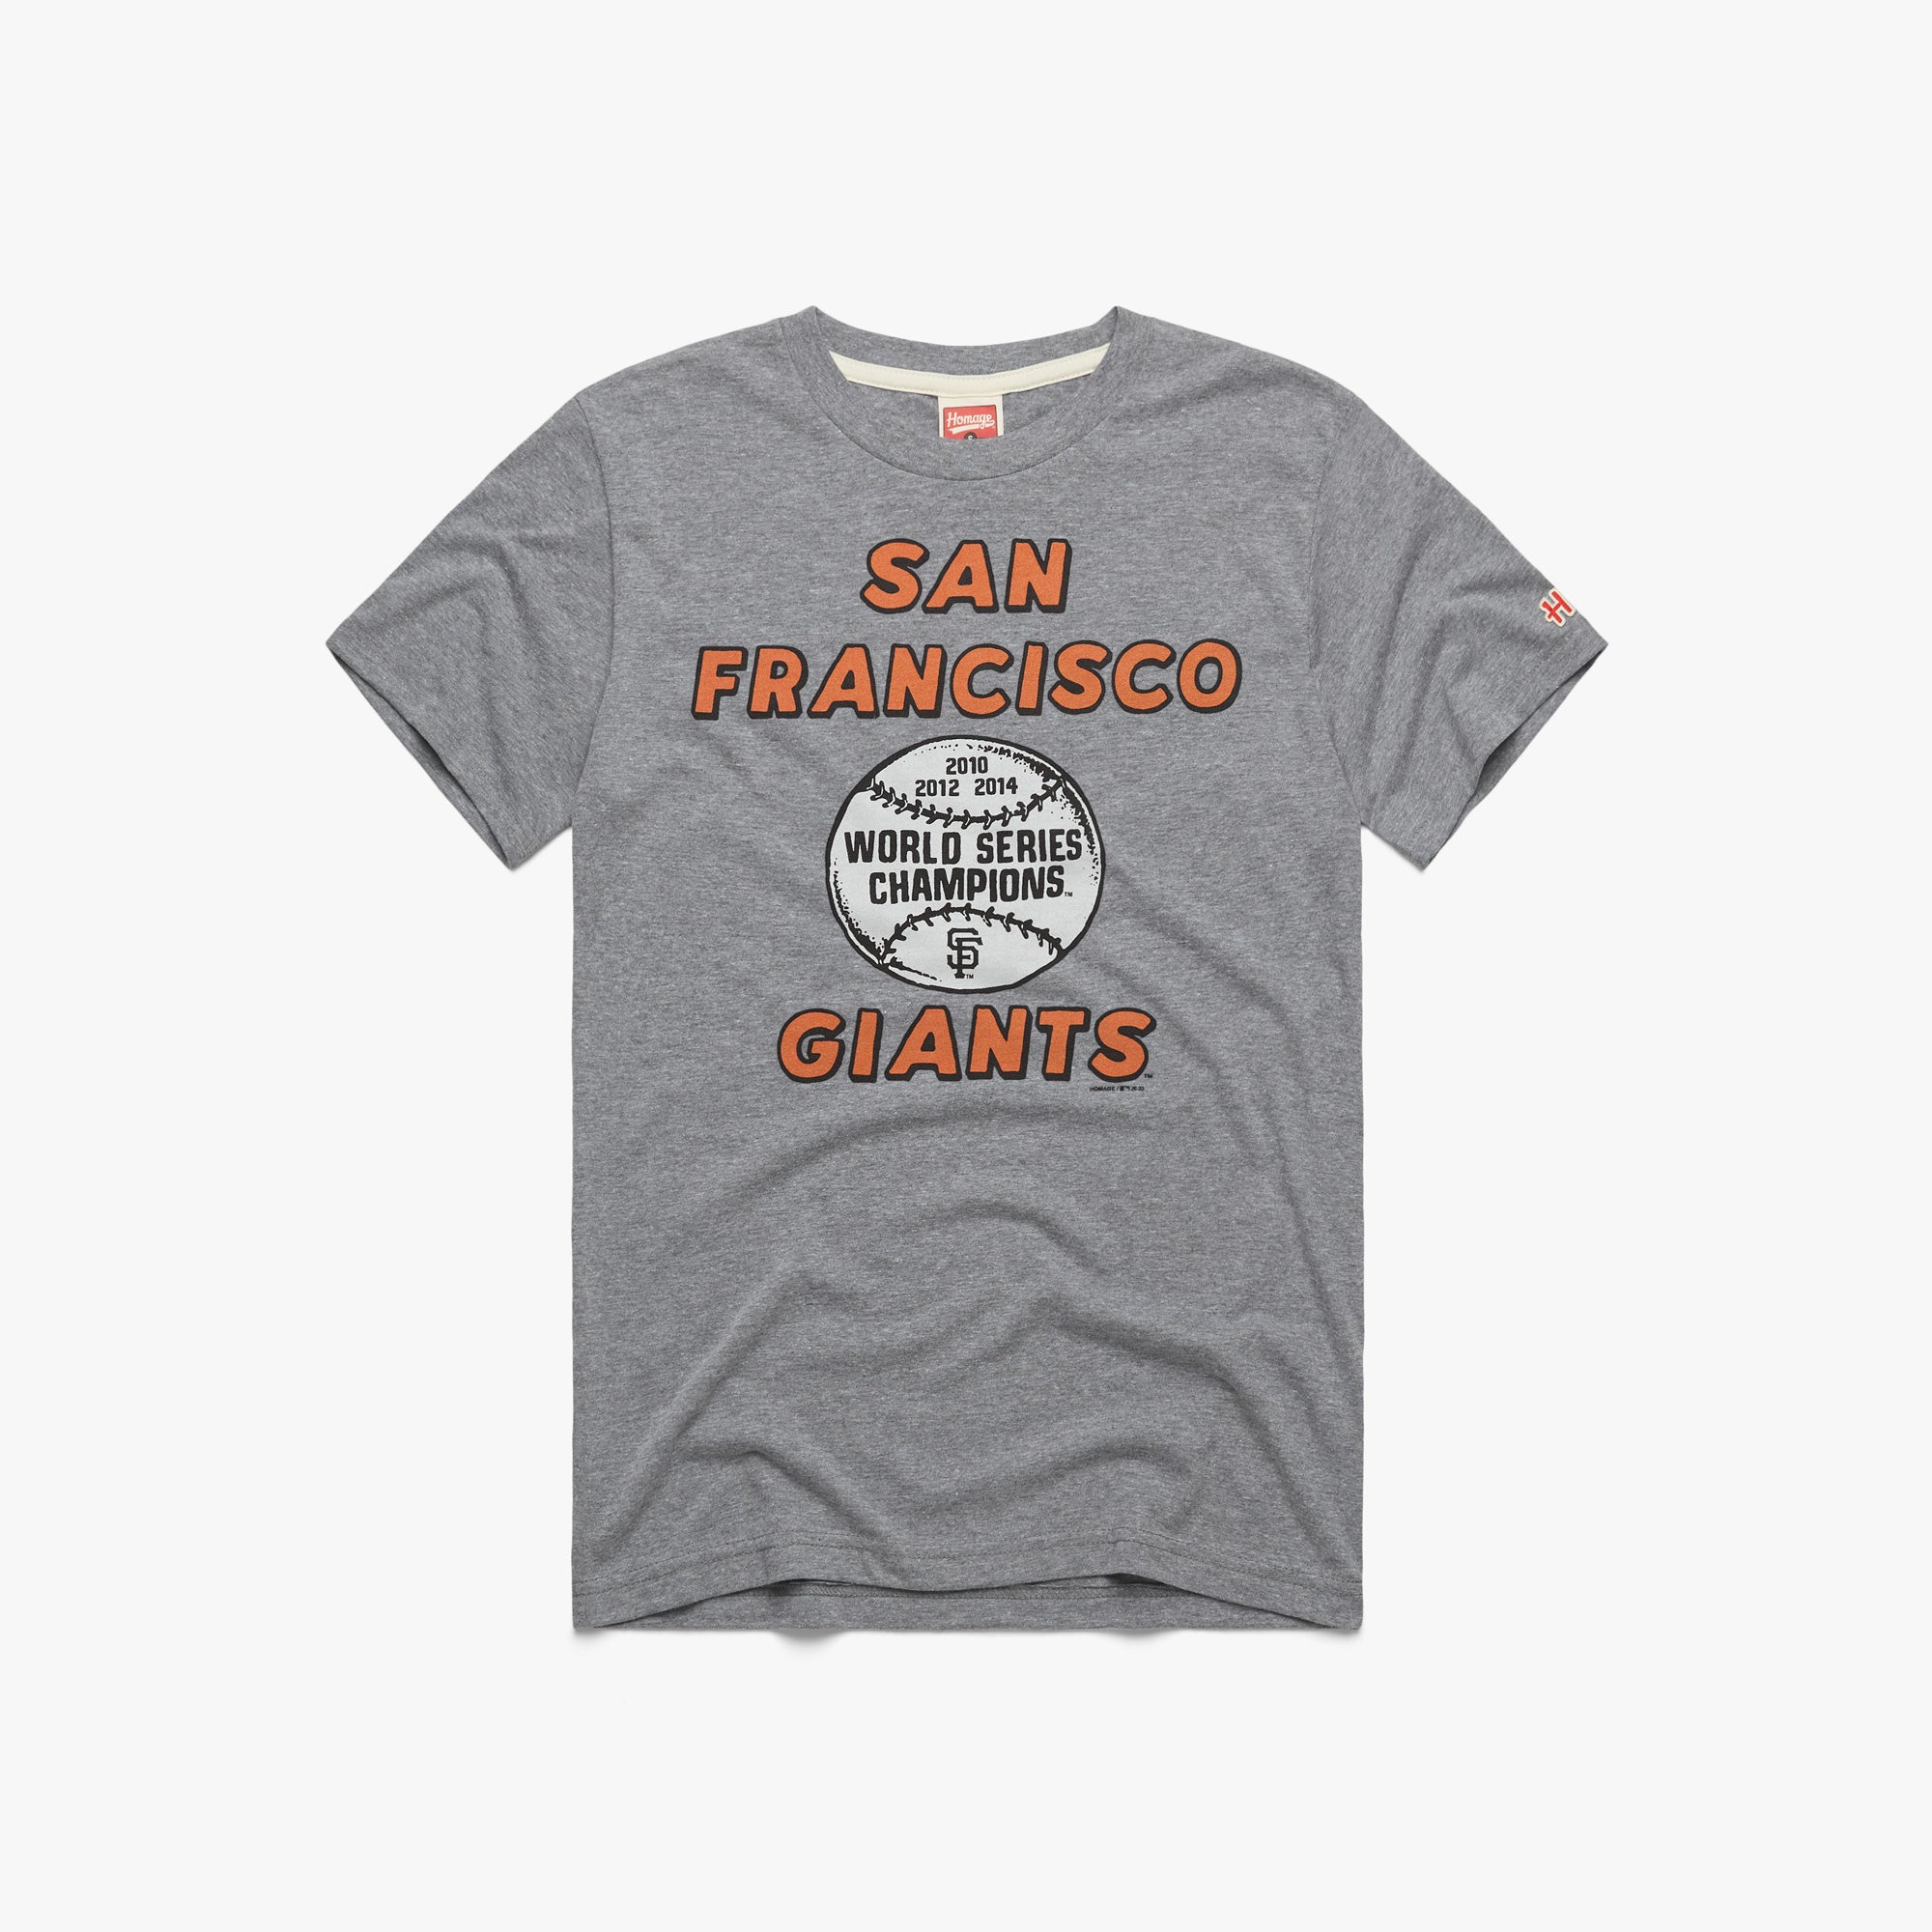 Giants '10 '12 '14 World Series Champs T-Shirt from Homage. | Grey | Vintage Apparel from Homage.